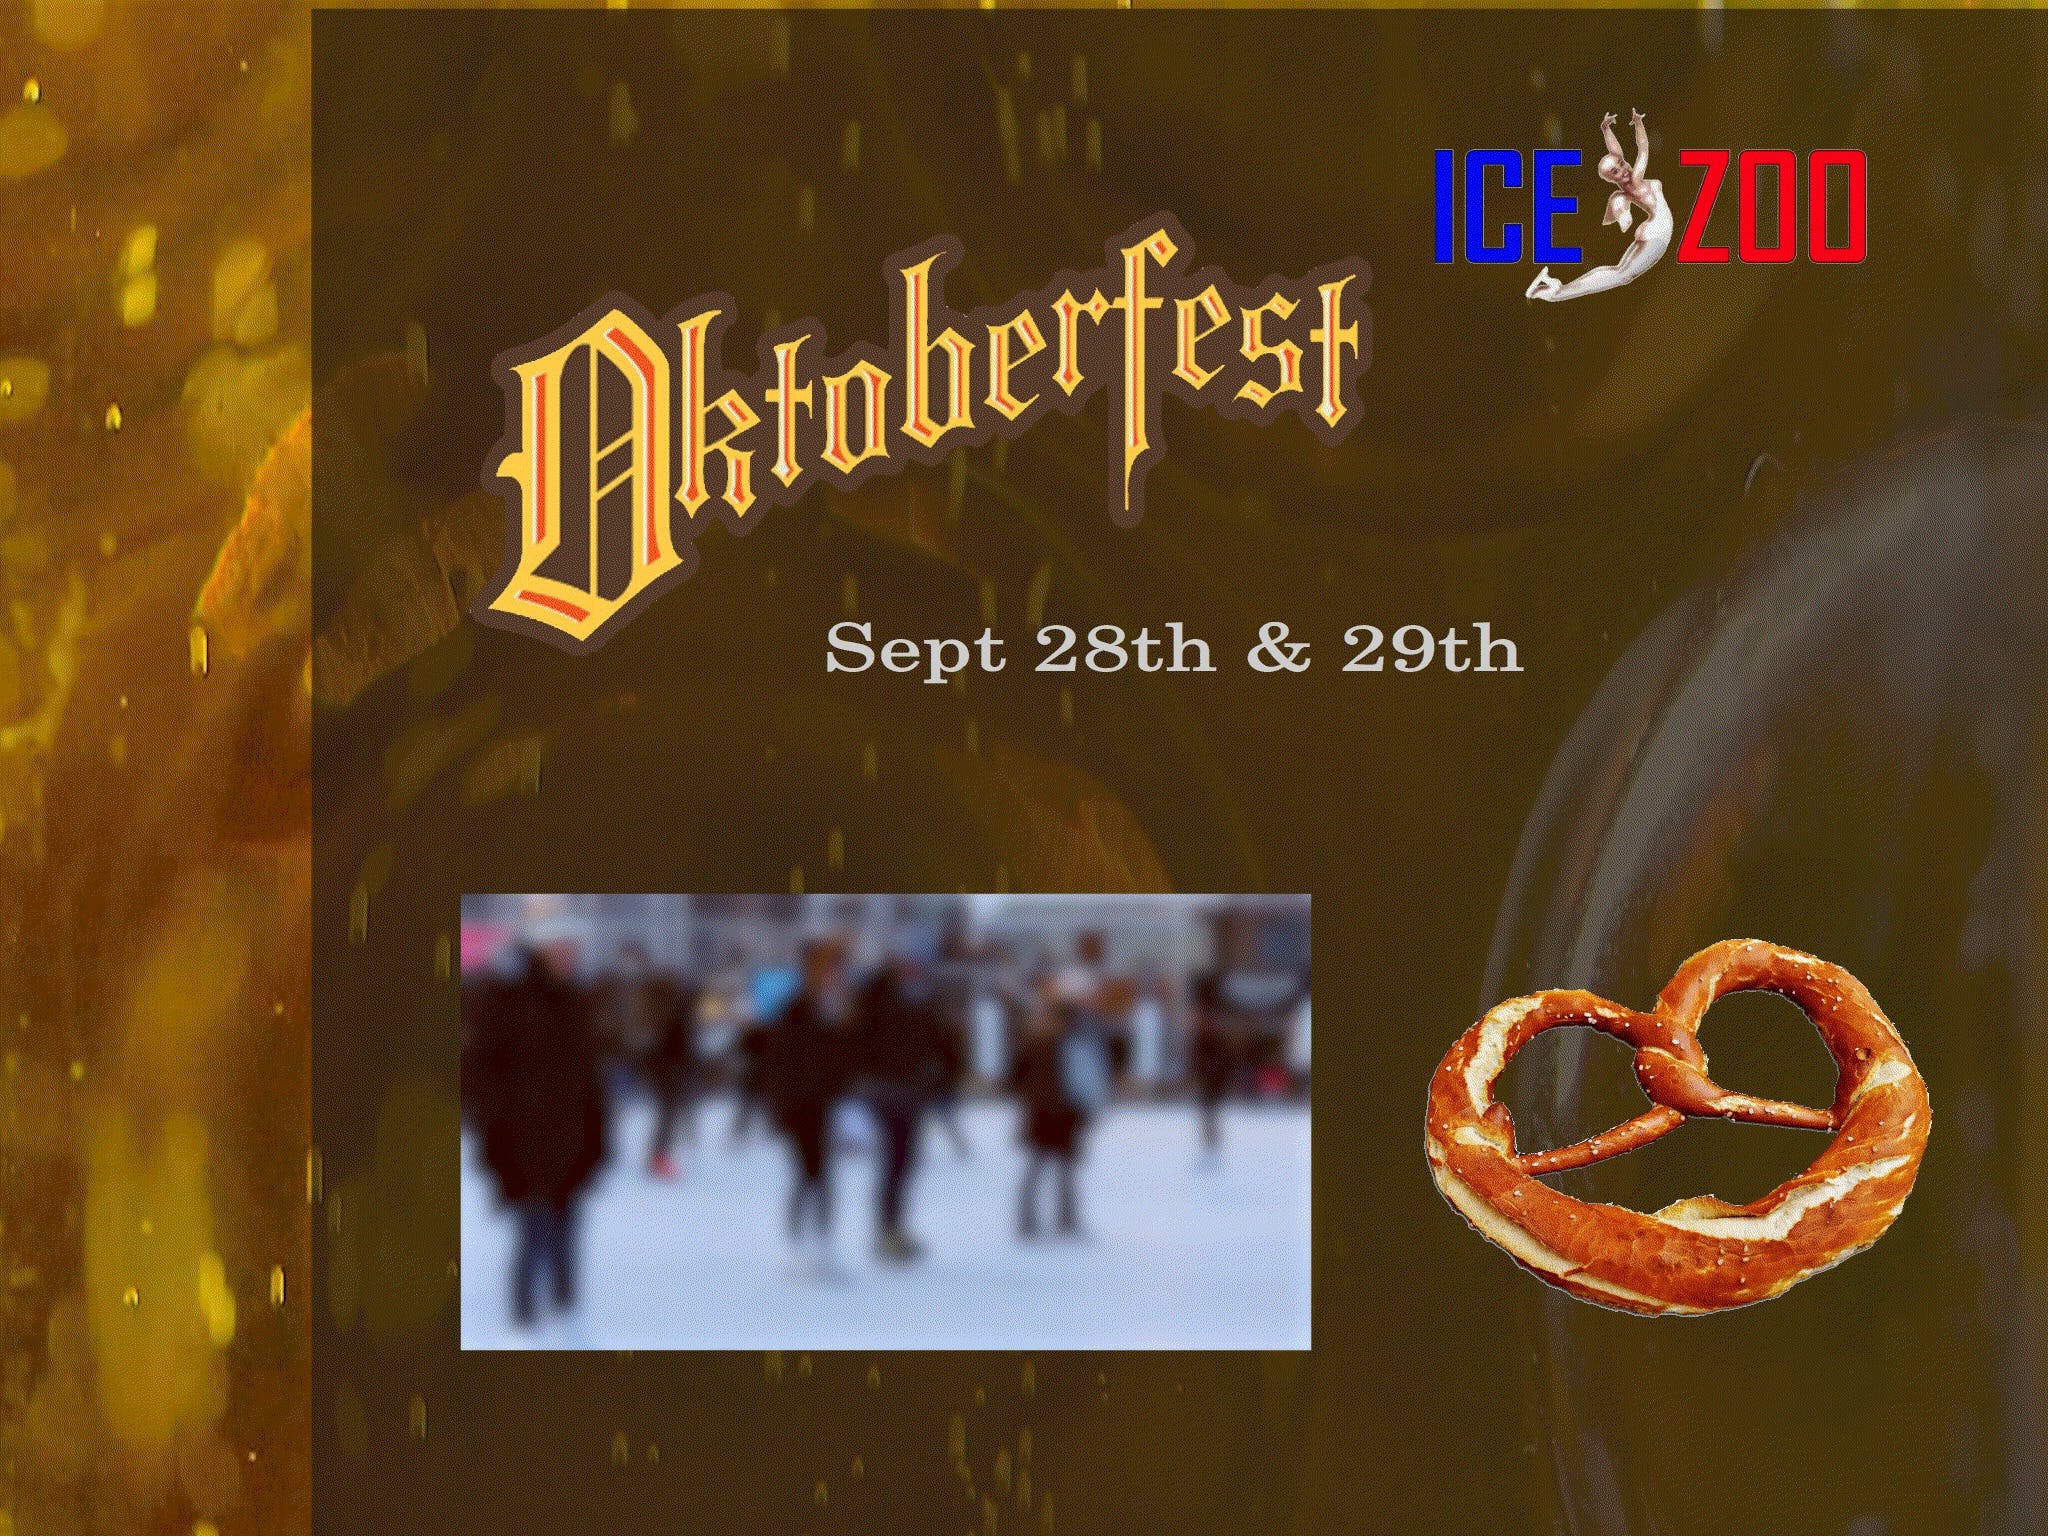 Oktoberfest at Ice Zoo - Pubs and Clubs